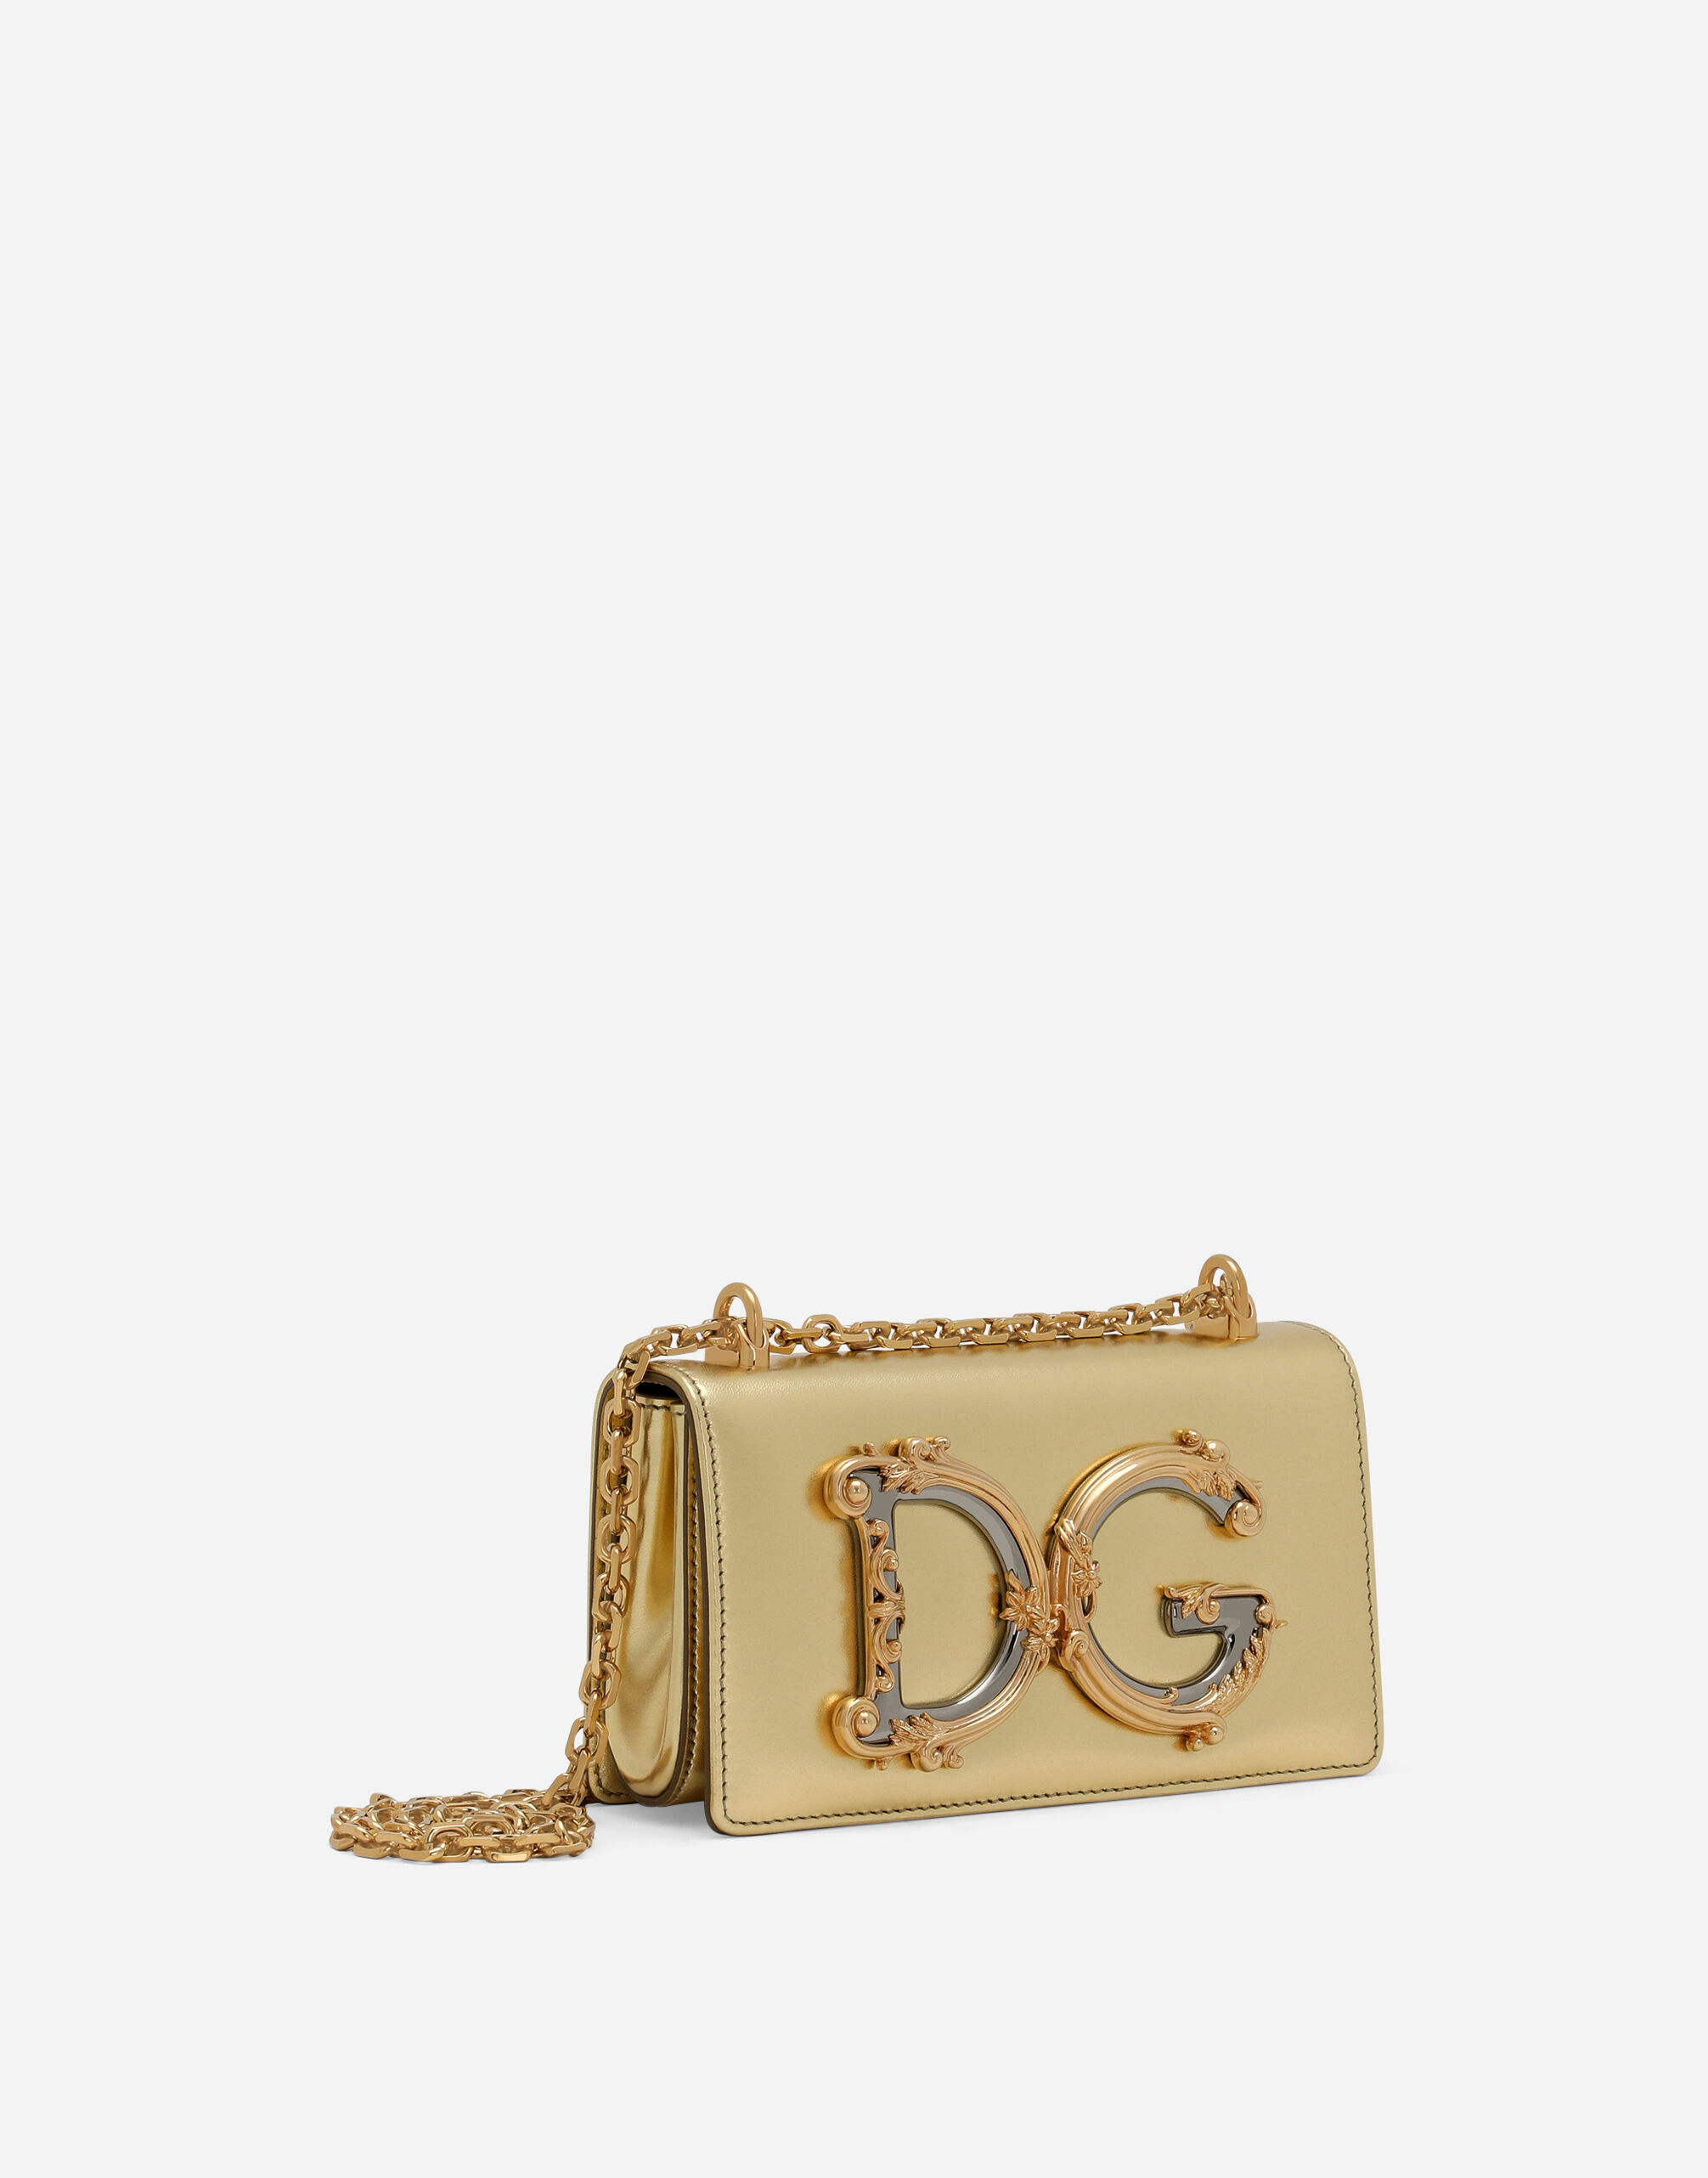 DG Girls phone bag in nappa mordore leather in Gold for Women 